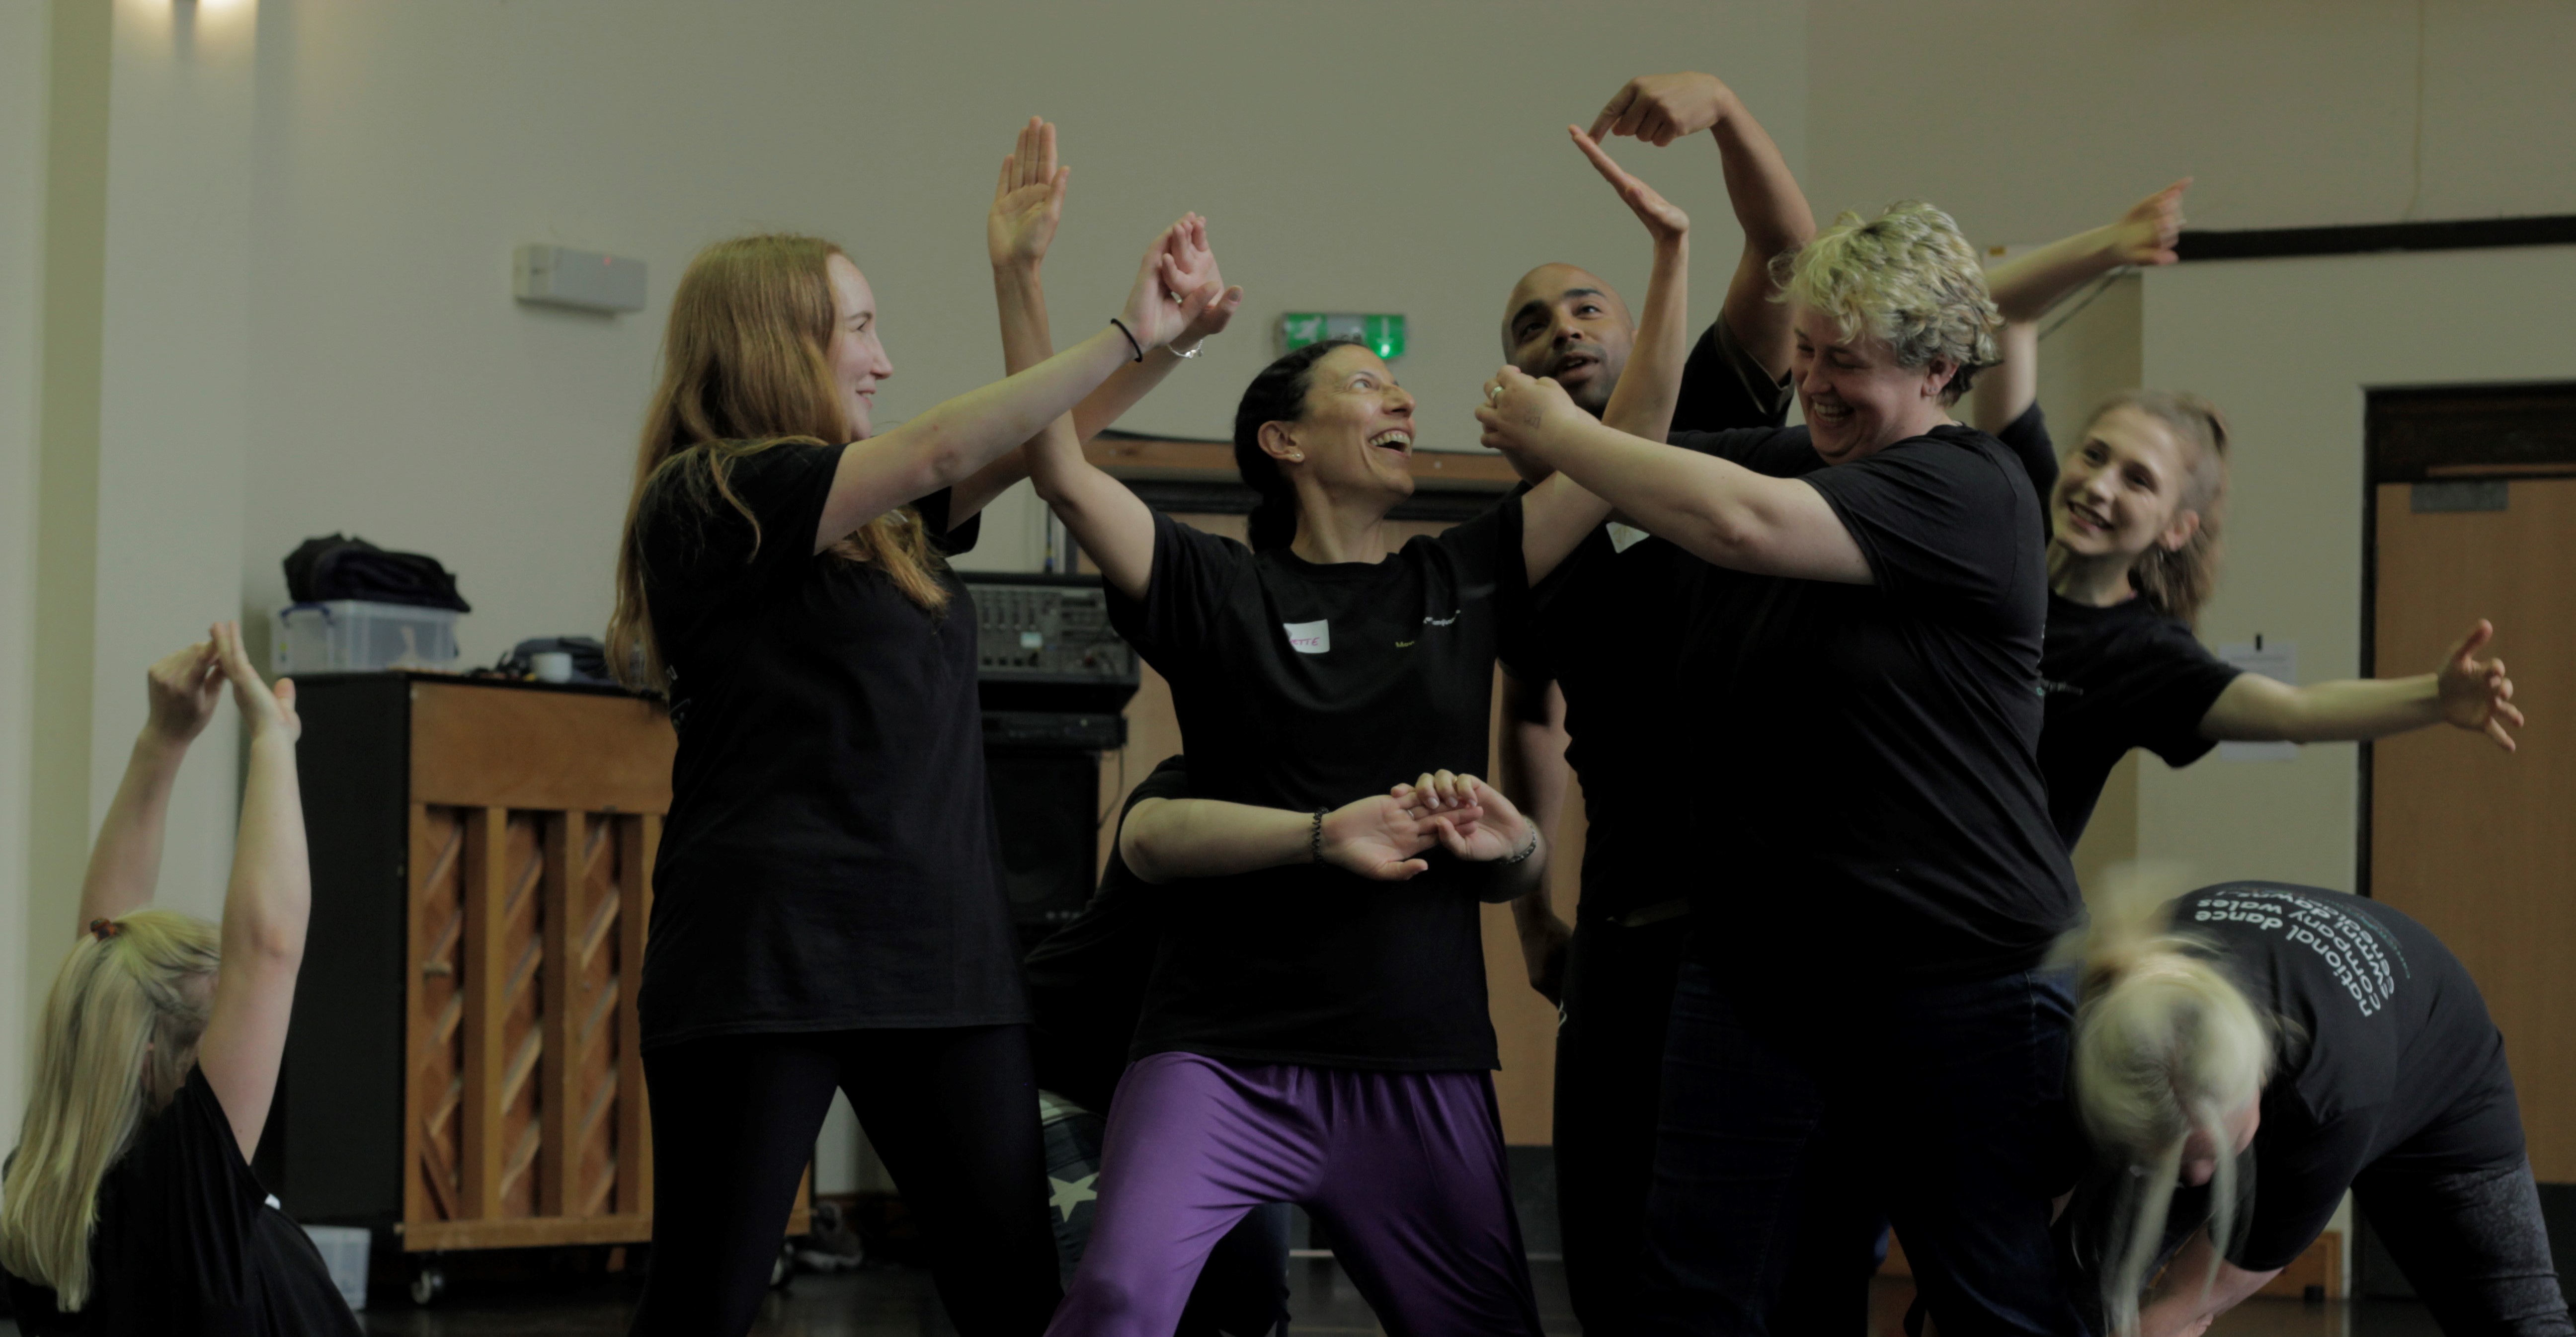 Seven staff from Cartrefi Cymru Co-operative engaging in a dance-based exercise with National Dance Company Wales